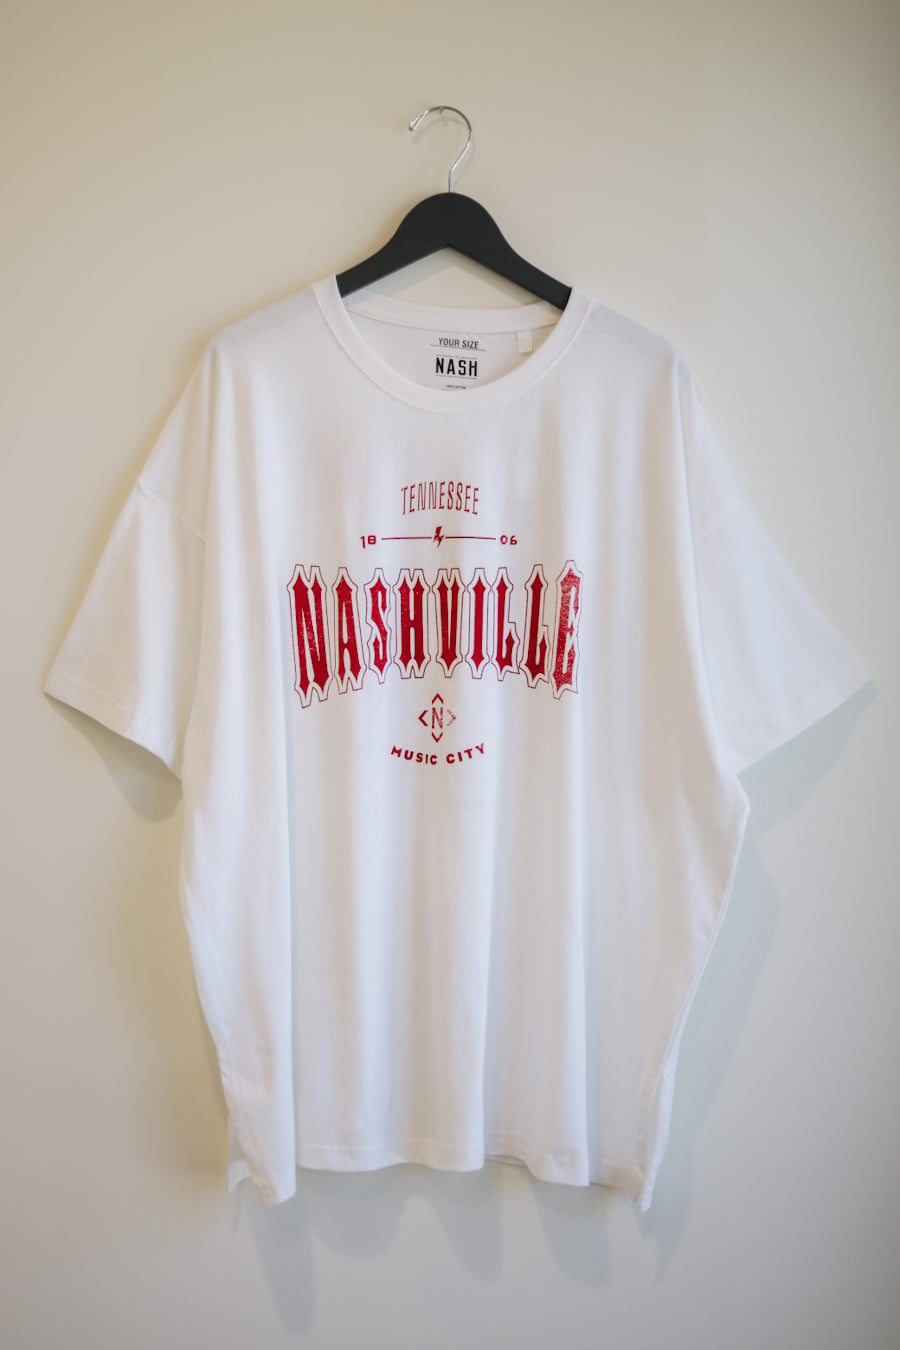 White oversize tee with a vintage inspired nashville graphic